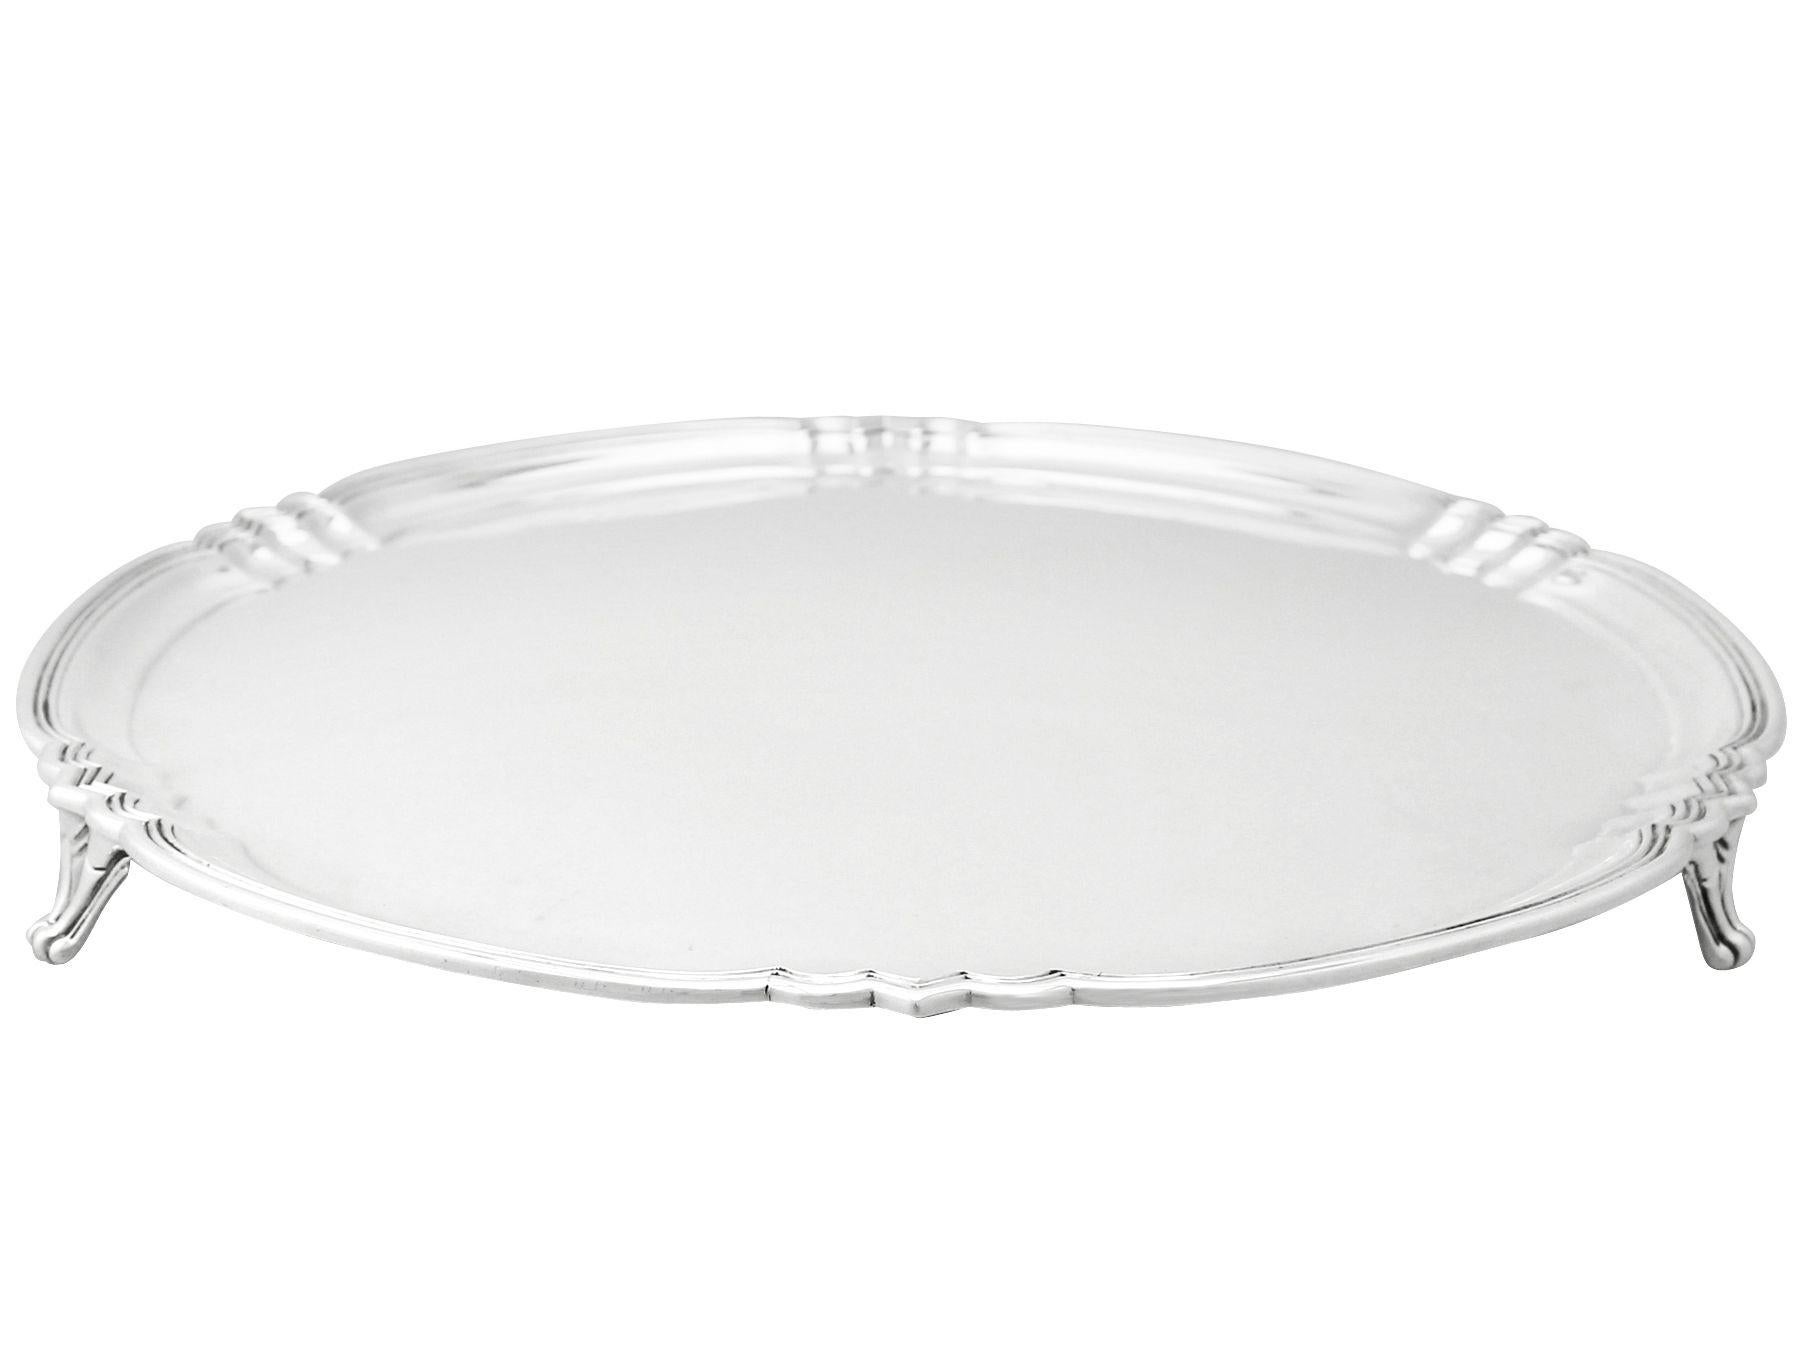 An exceptional, fine and impressive antique George V English sterling silver salver made by Reid & Sons in the Art Deco style, an addition to our dining silverware collection.

This exceptional antique sterling silver salver has a plain circular